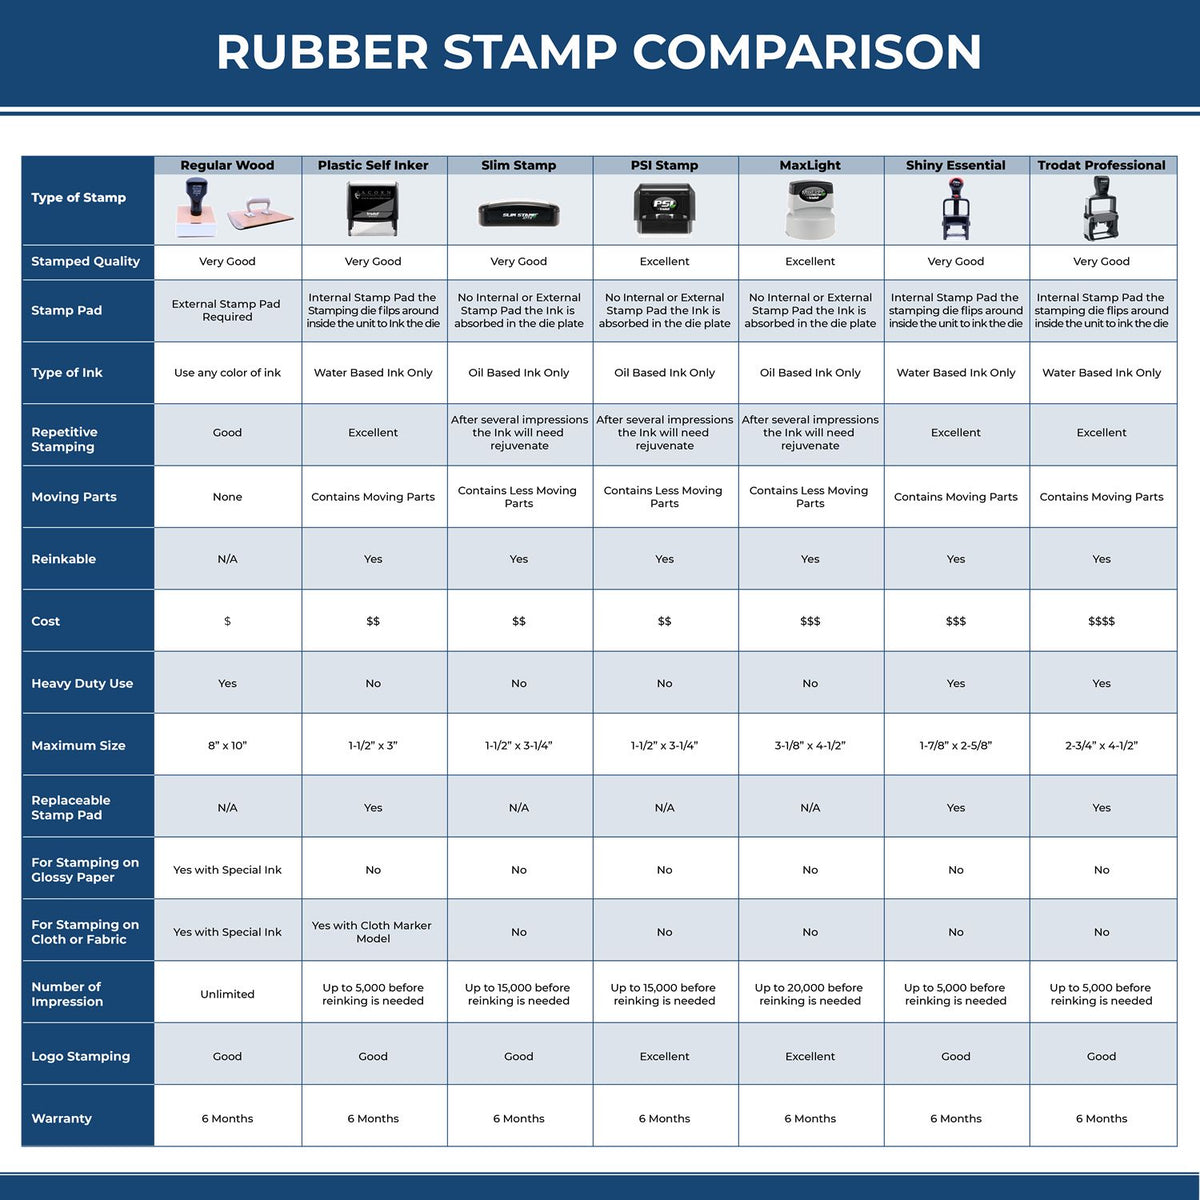 A comparison chart for the different types of mount models available for the Wooden Handle South Dakota Rectangular Notary Public Stamp.